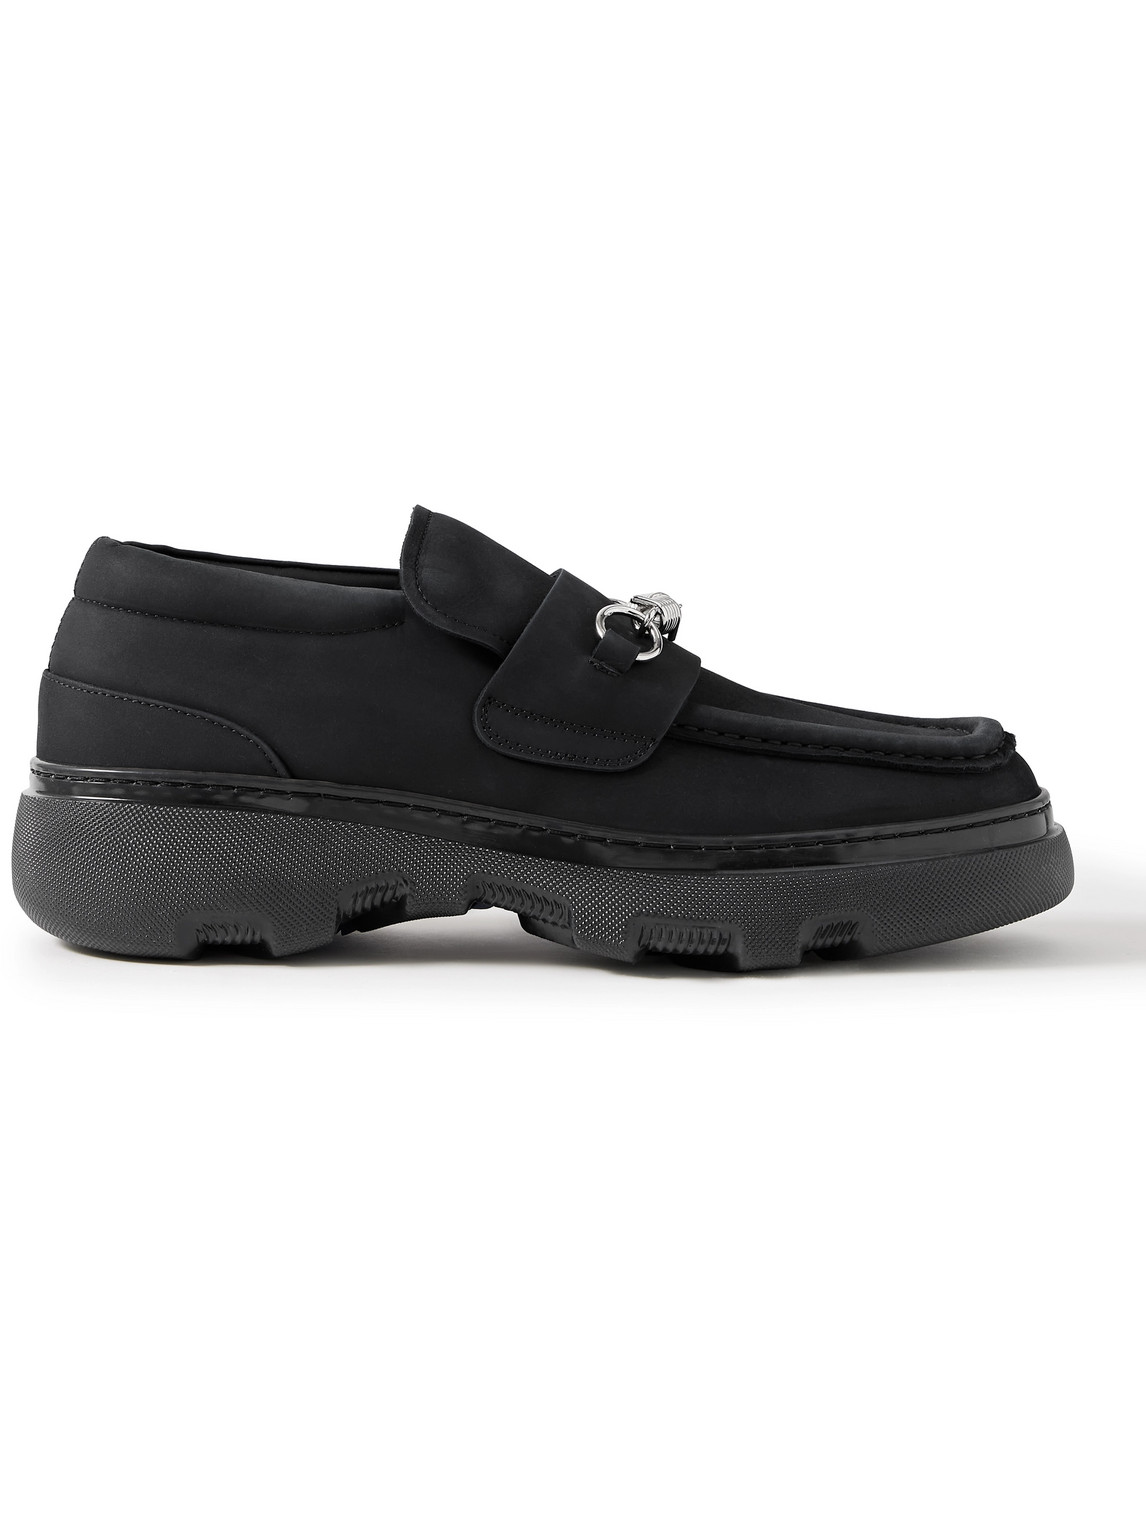 Burberry Nubuck Creeper Clamp Loafers In Black